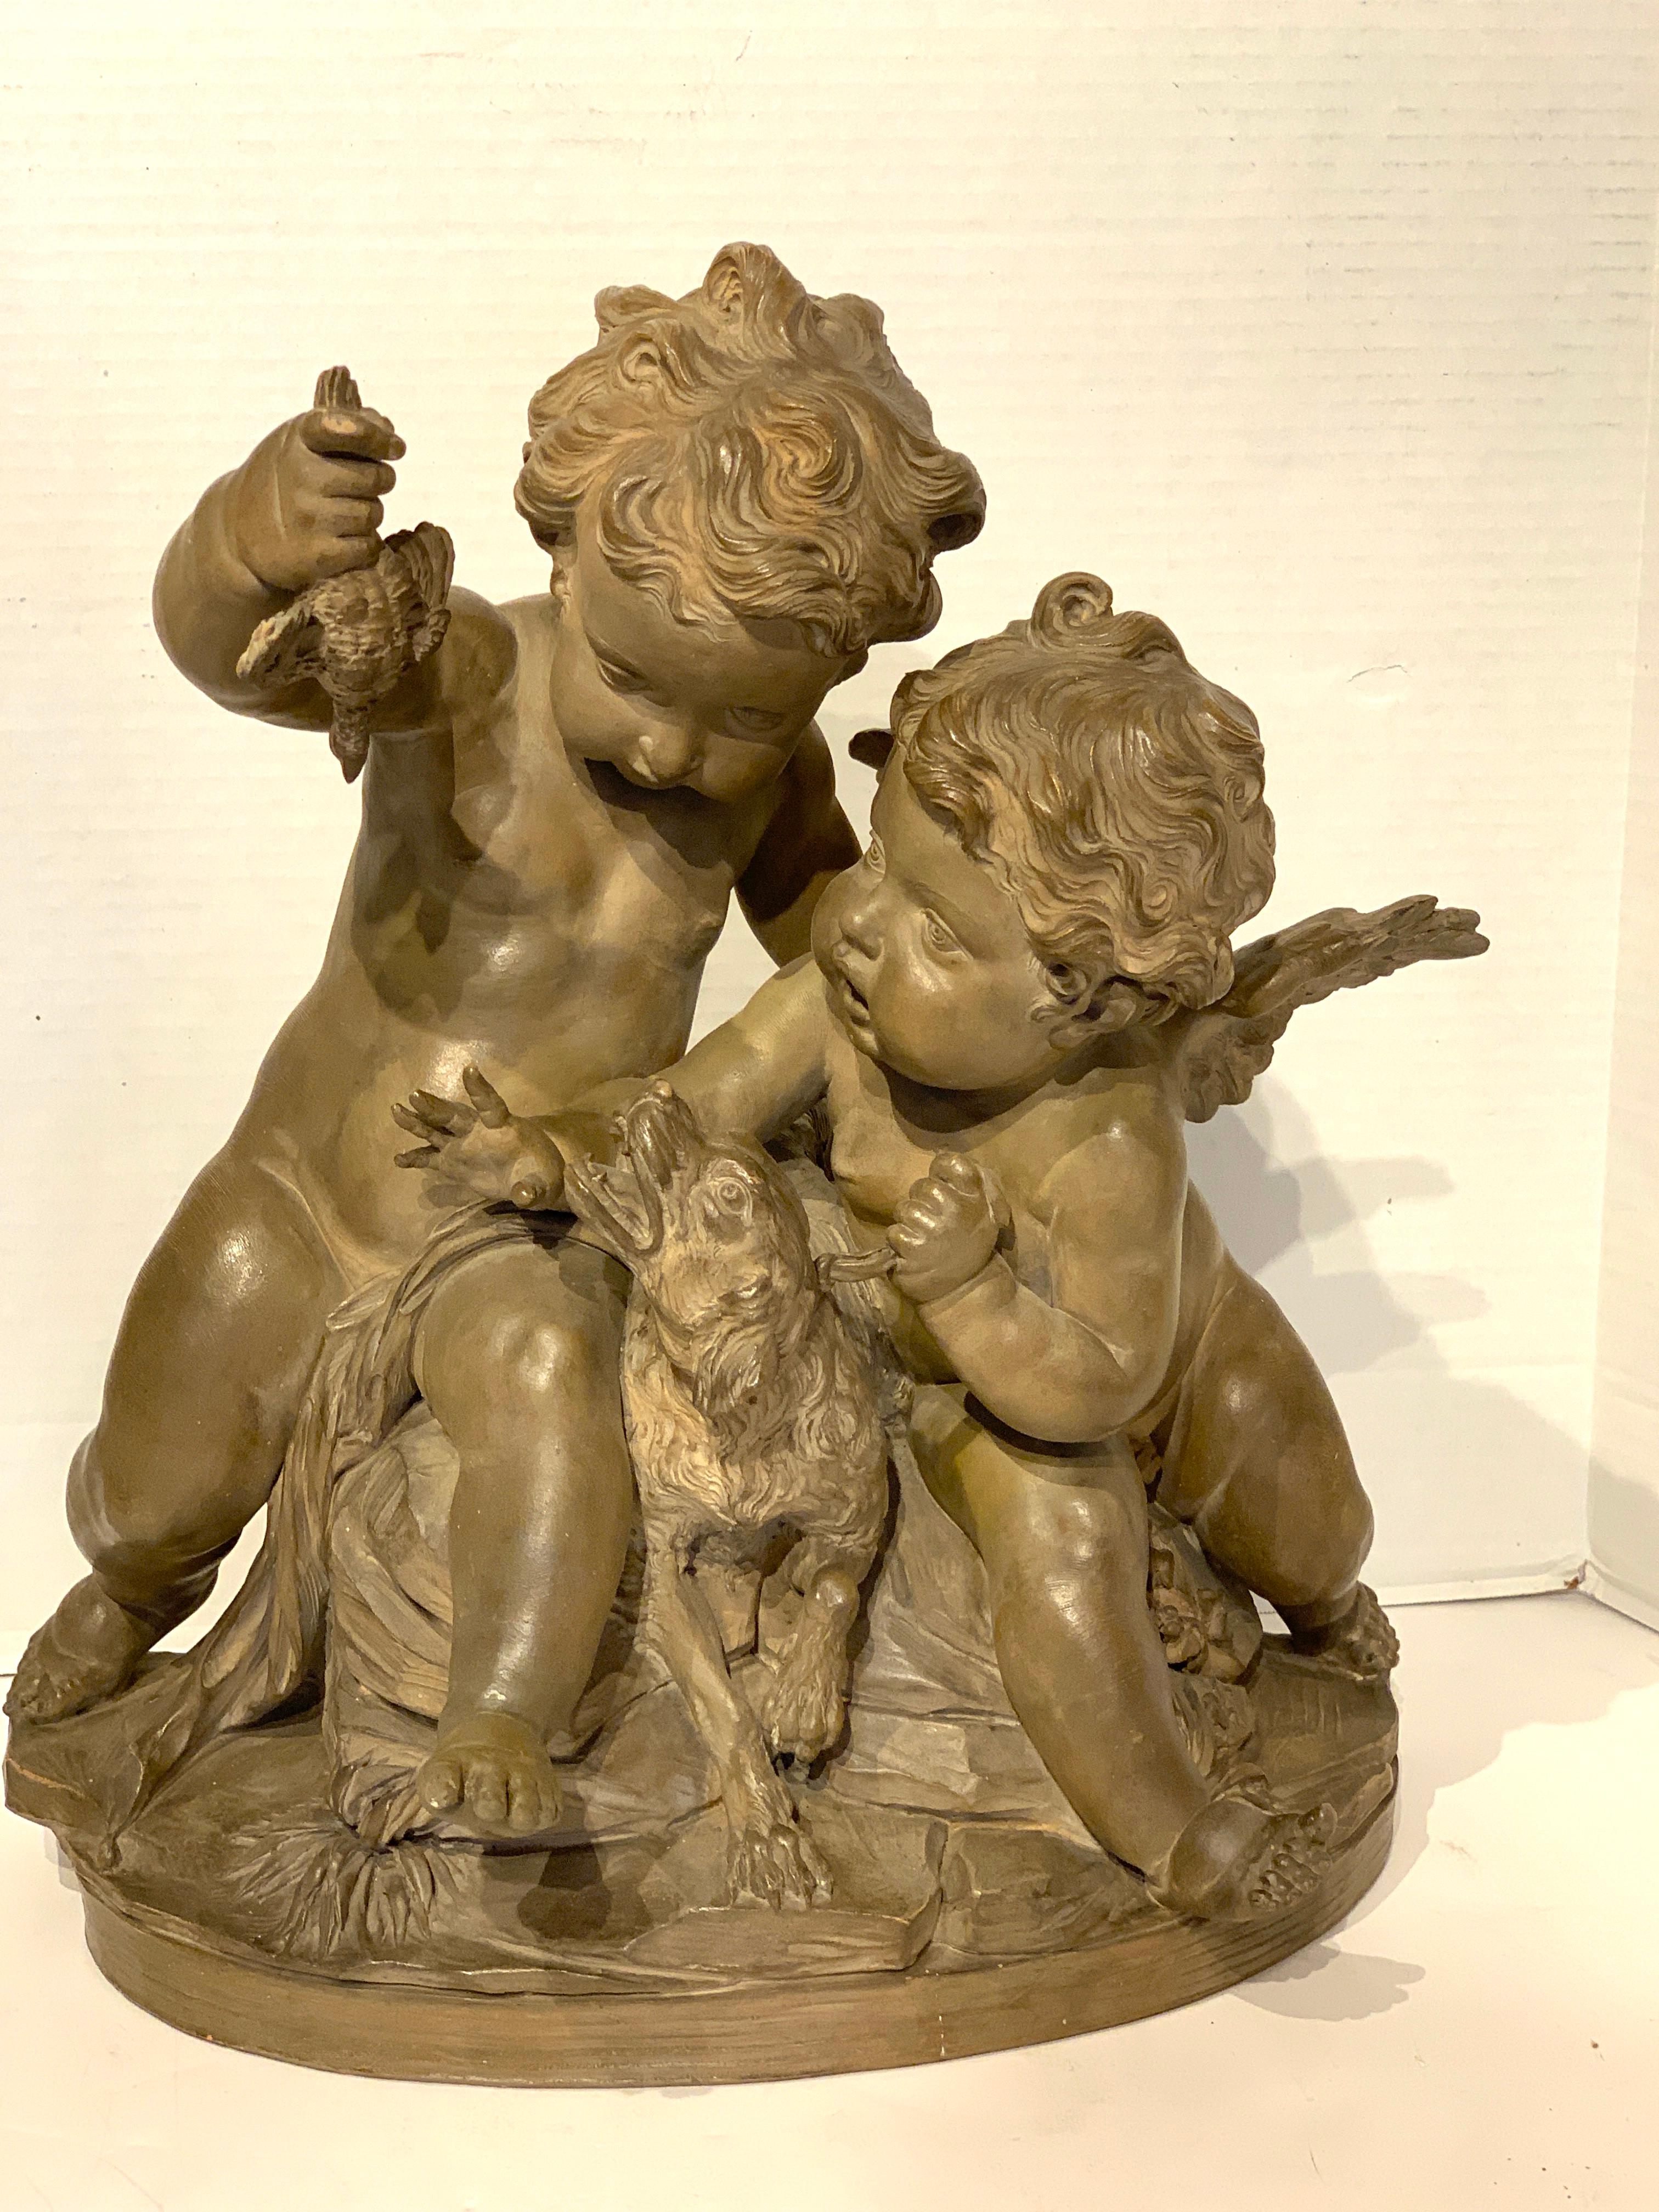 Exquisite 19th Century French Terracotta Grouping in the Style of Clodion In Good Condition For Sale In Atlanta, GA